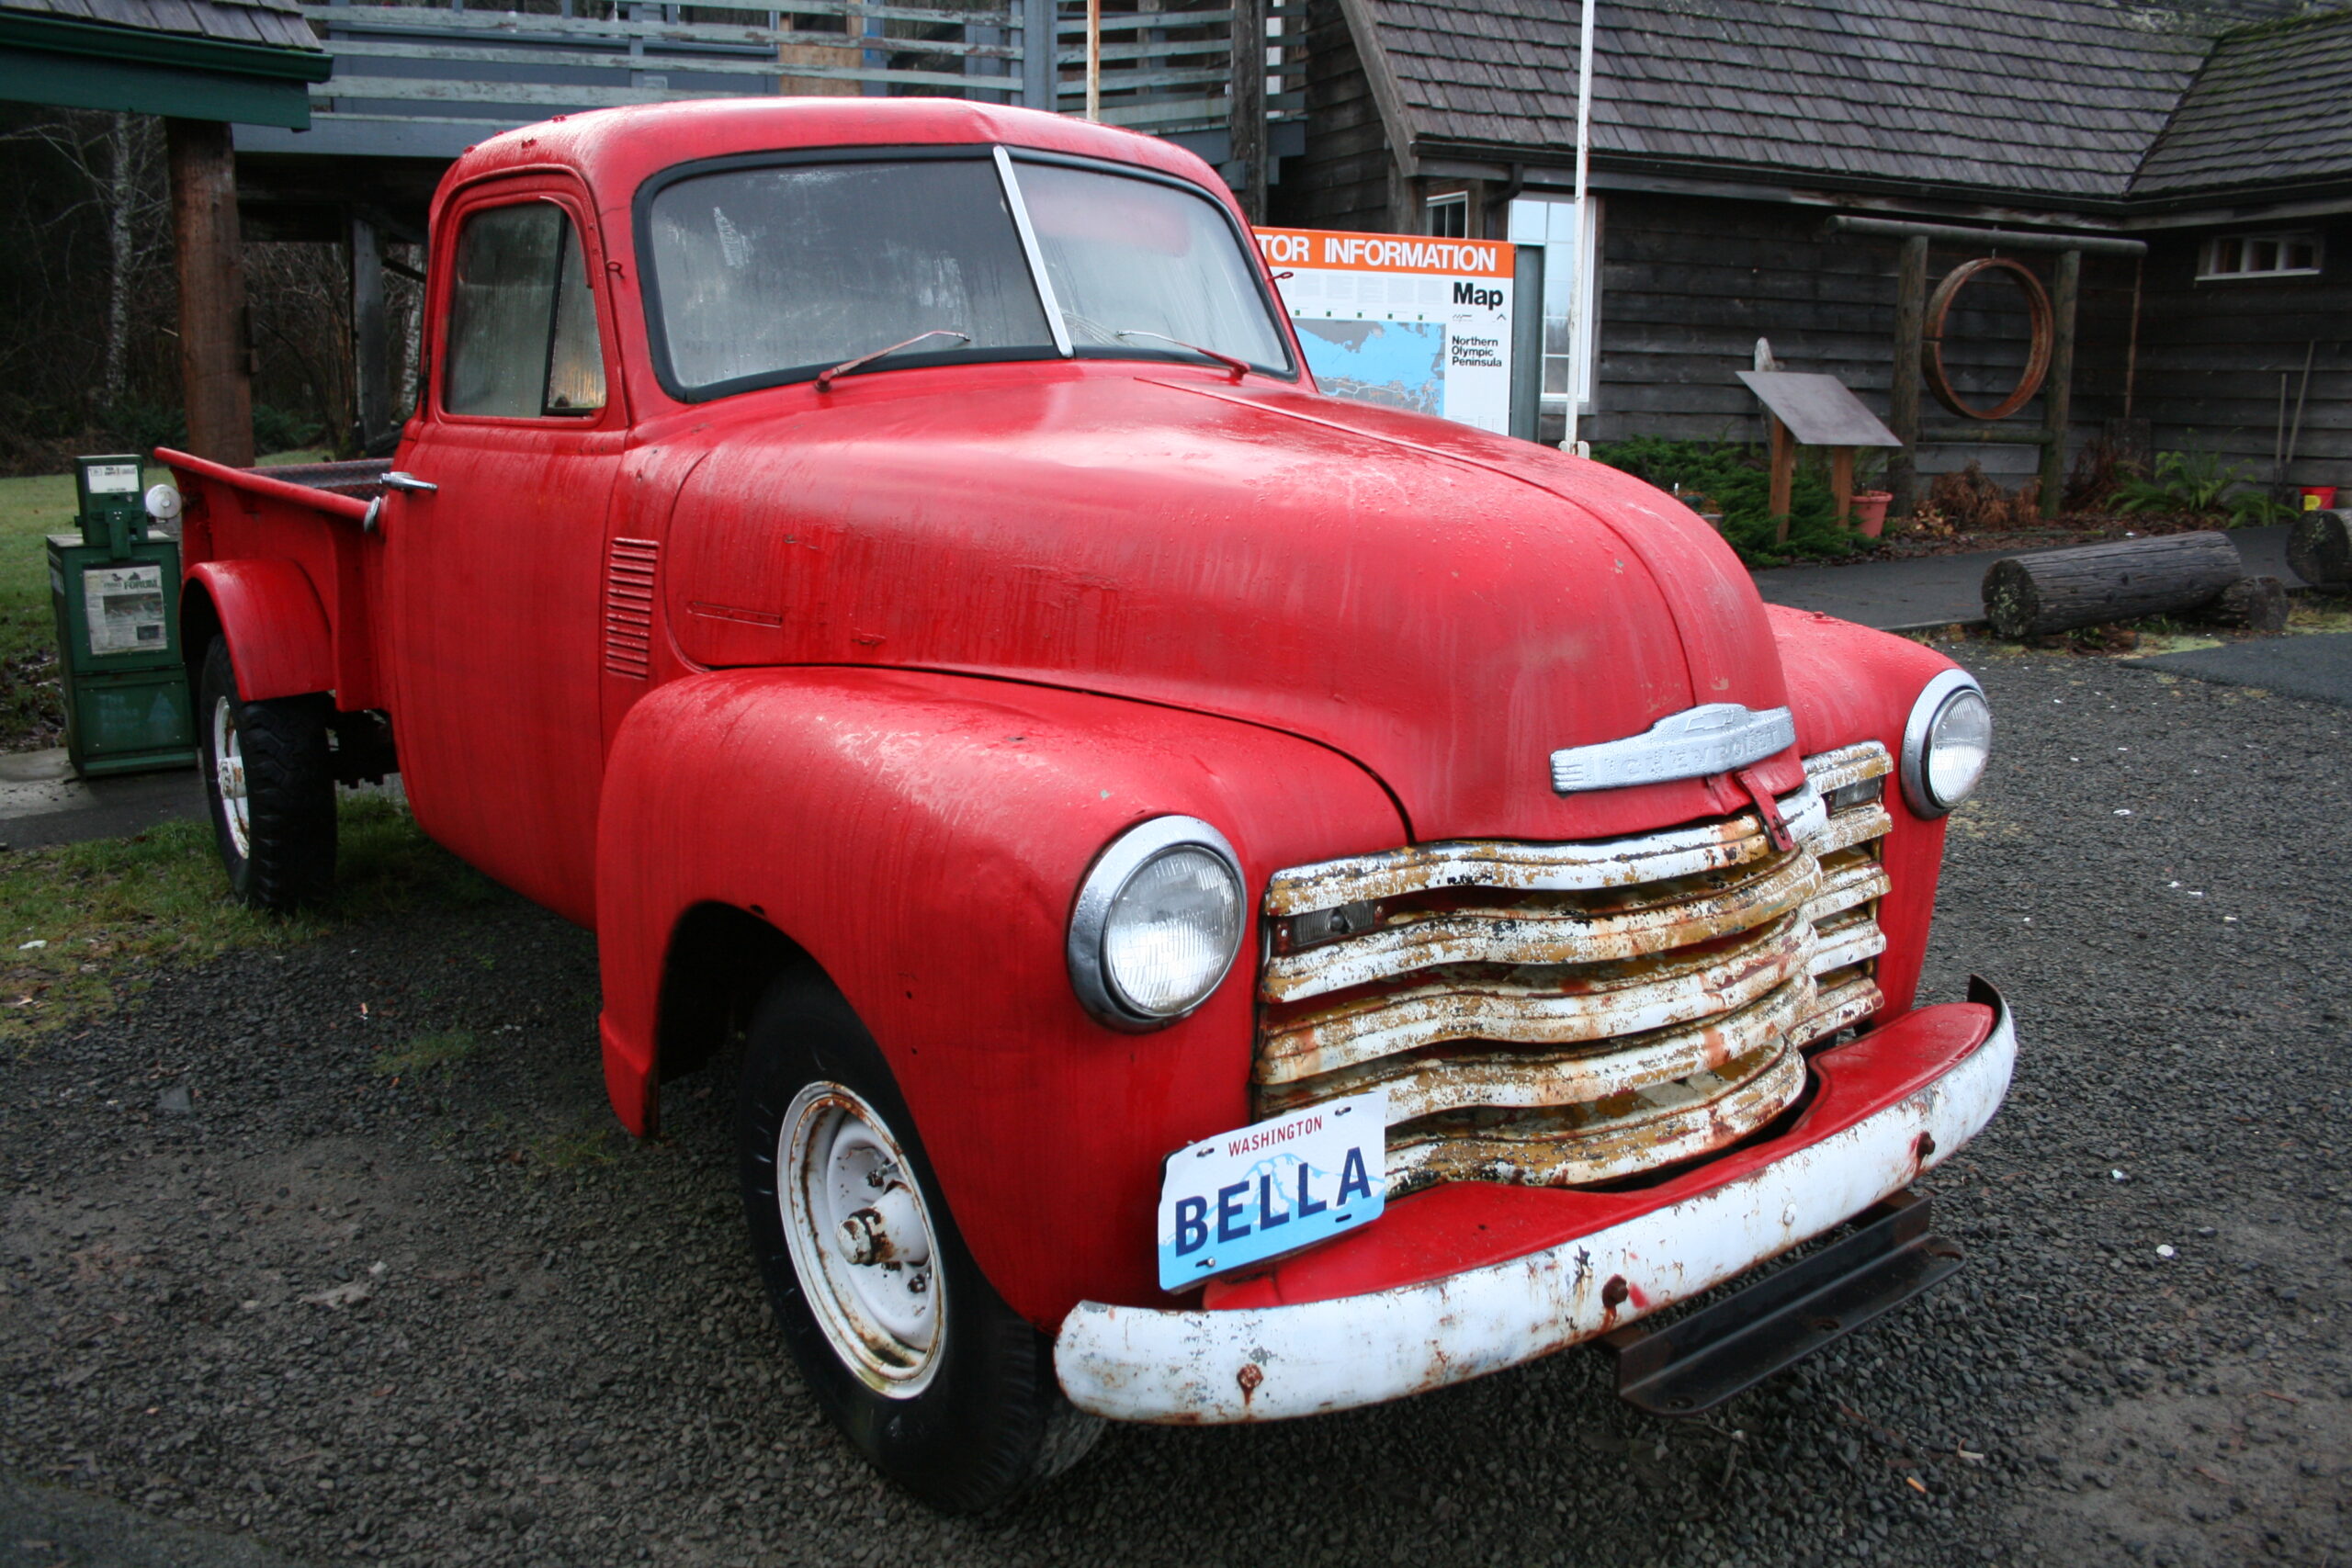 Bella's red, 1953 Chevrolet pickup truck sits outside the Forks Chamber of Commerce.